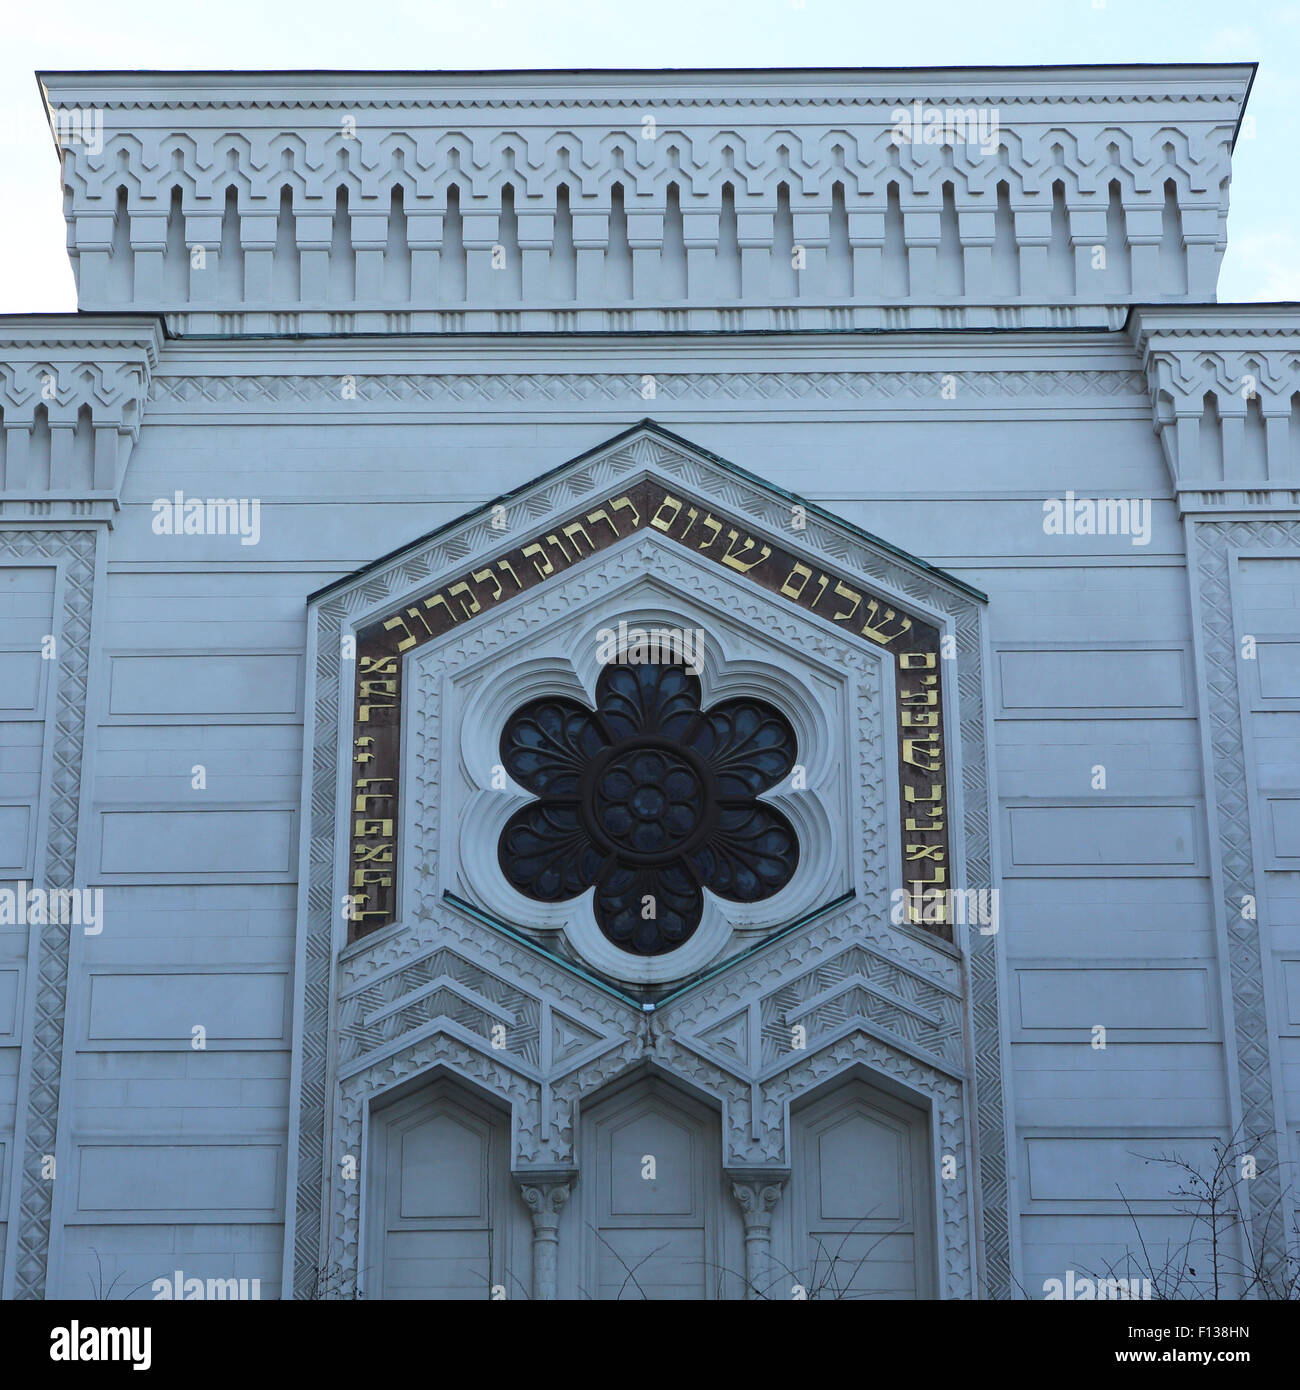 The Great Synagogue of Stockholm in Stockholm, Sweden. Stock Photo